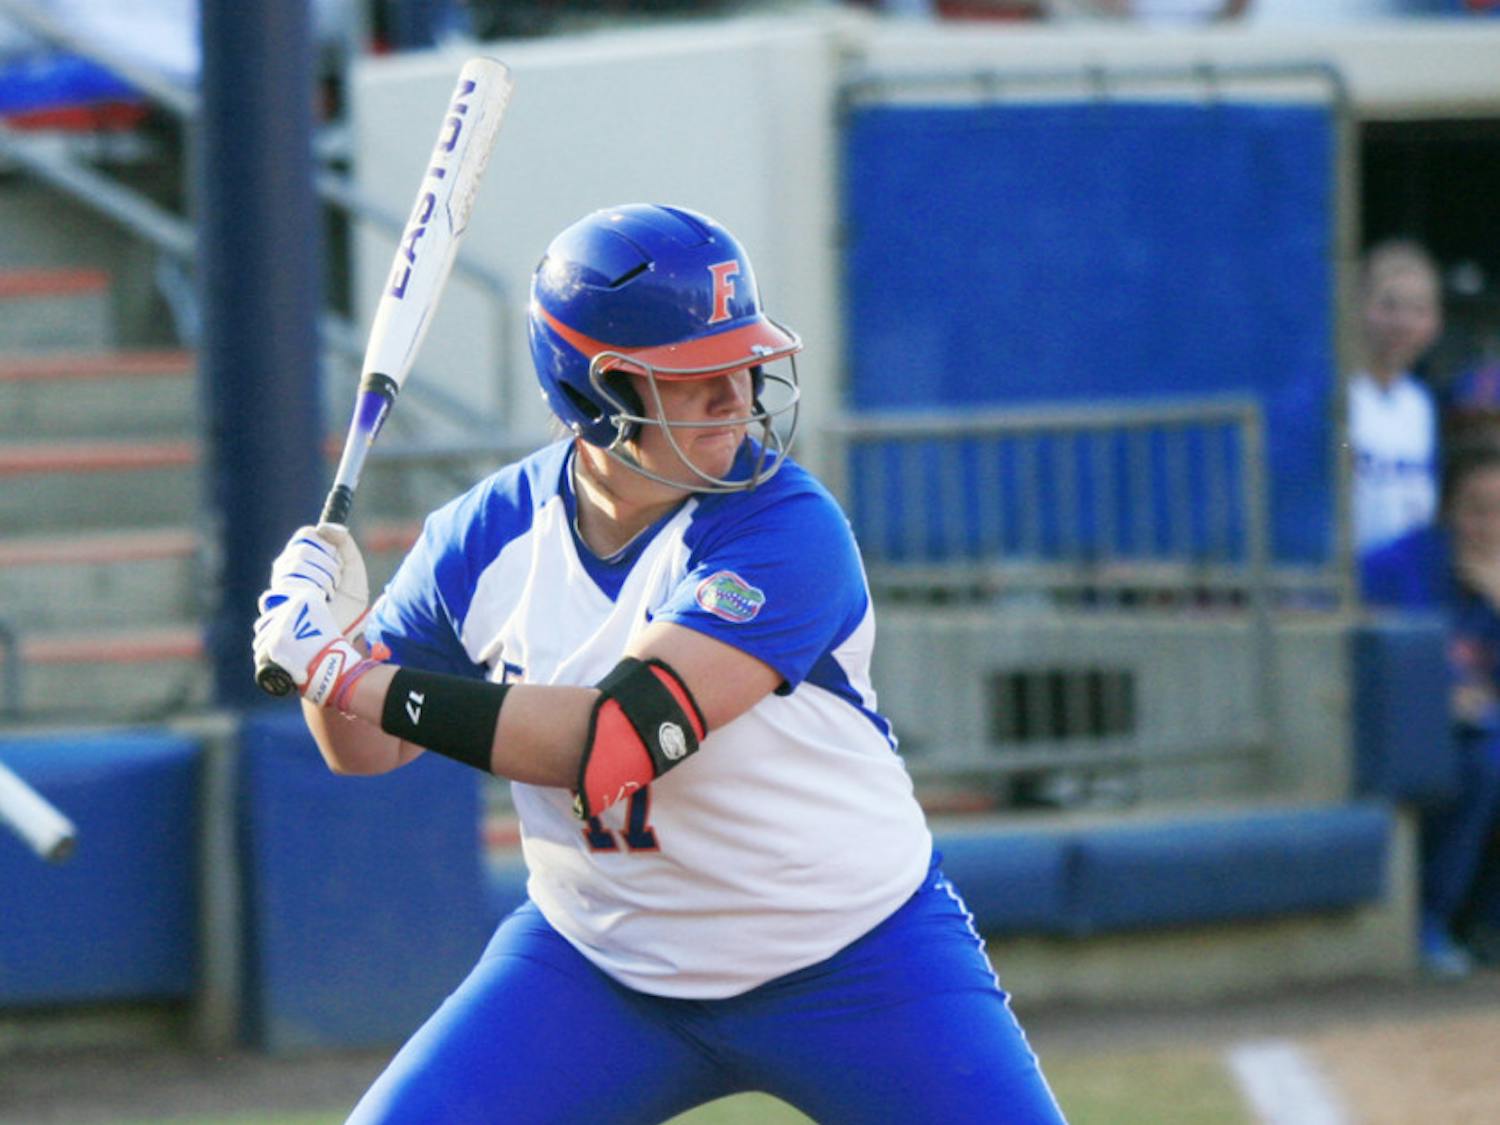 Lauren Haeger prepares to swing at the plate during Florida’s 6-5 win against Tennessee on March 15, 2013, at Katie Seashole Pressly Stadium.